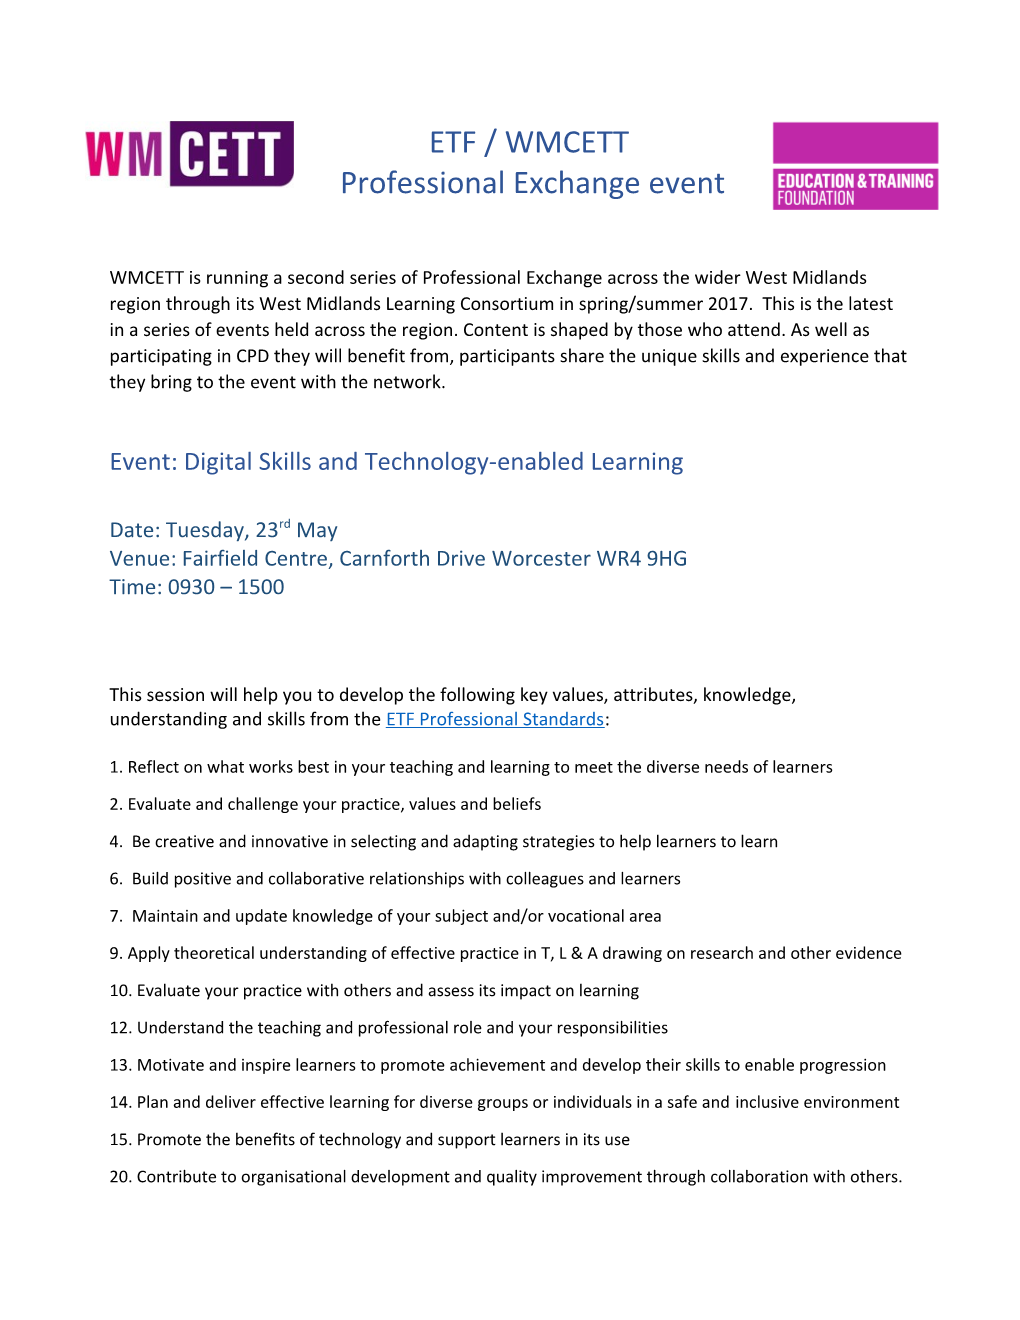 Event: Digital Skills and Technology-Enabled Learning